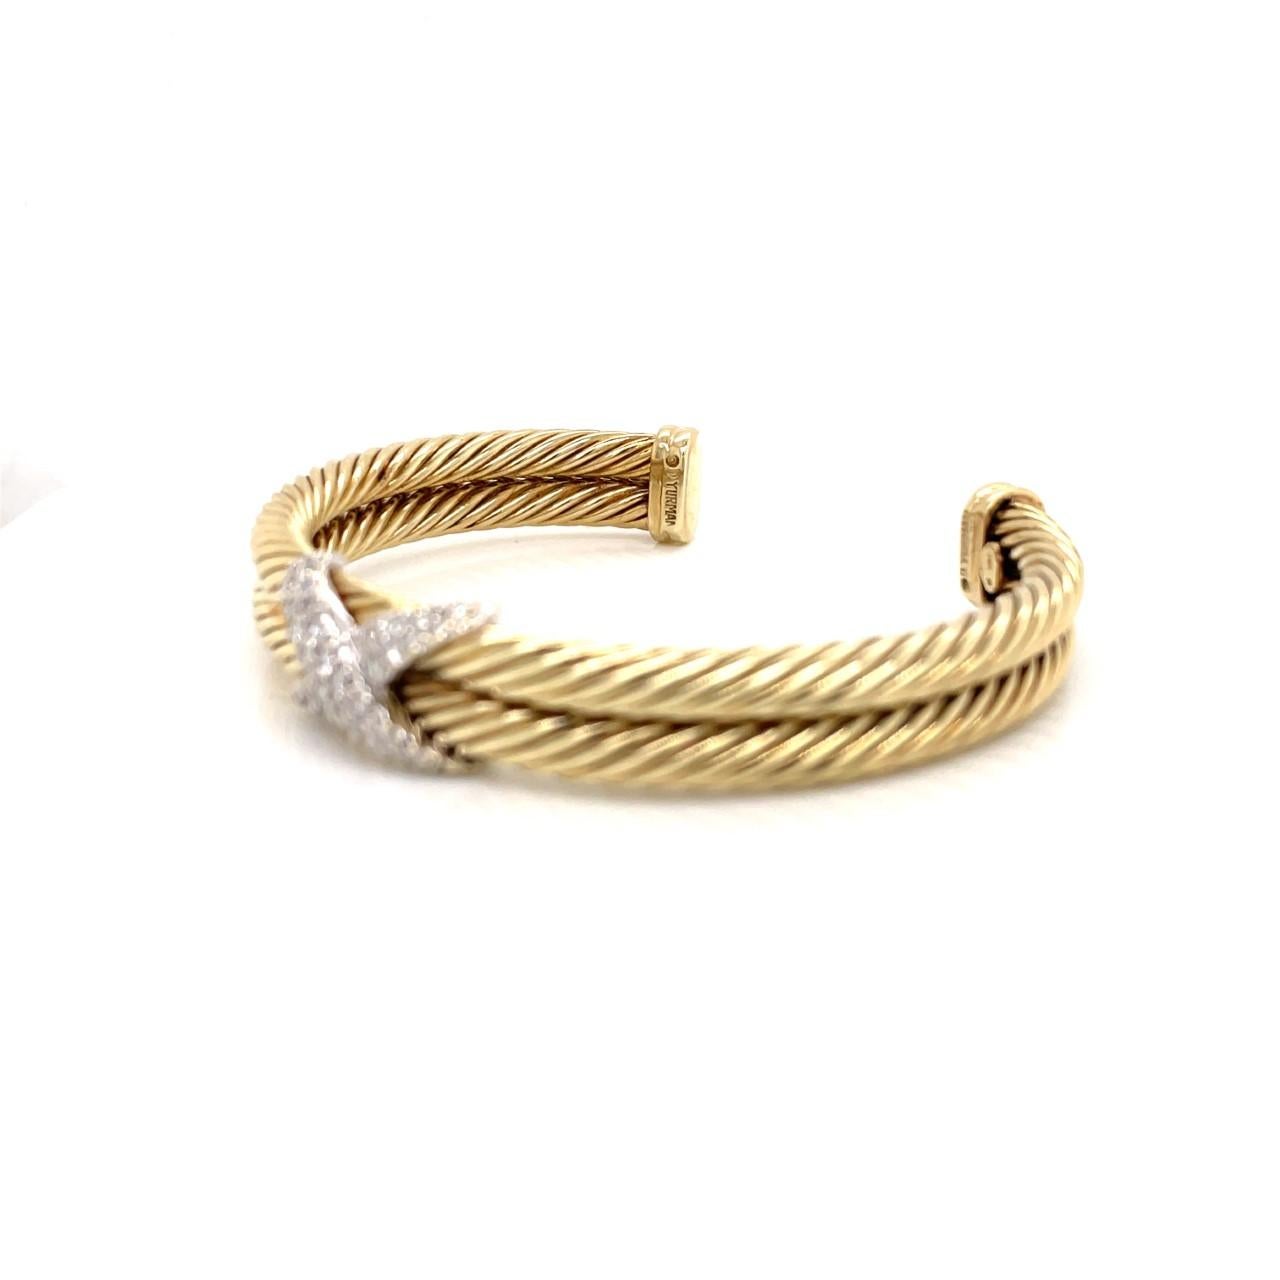 Round Cut David Yurman 14k Yellow Gold Crossover Cable Bracelet with Pave Diamonds